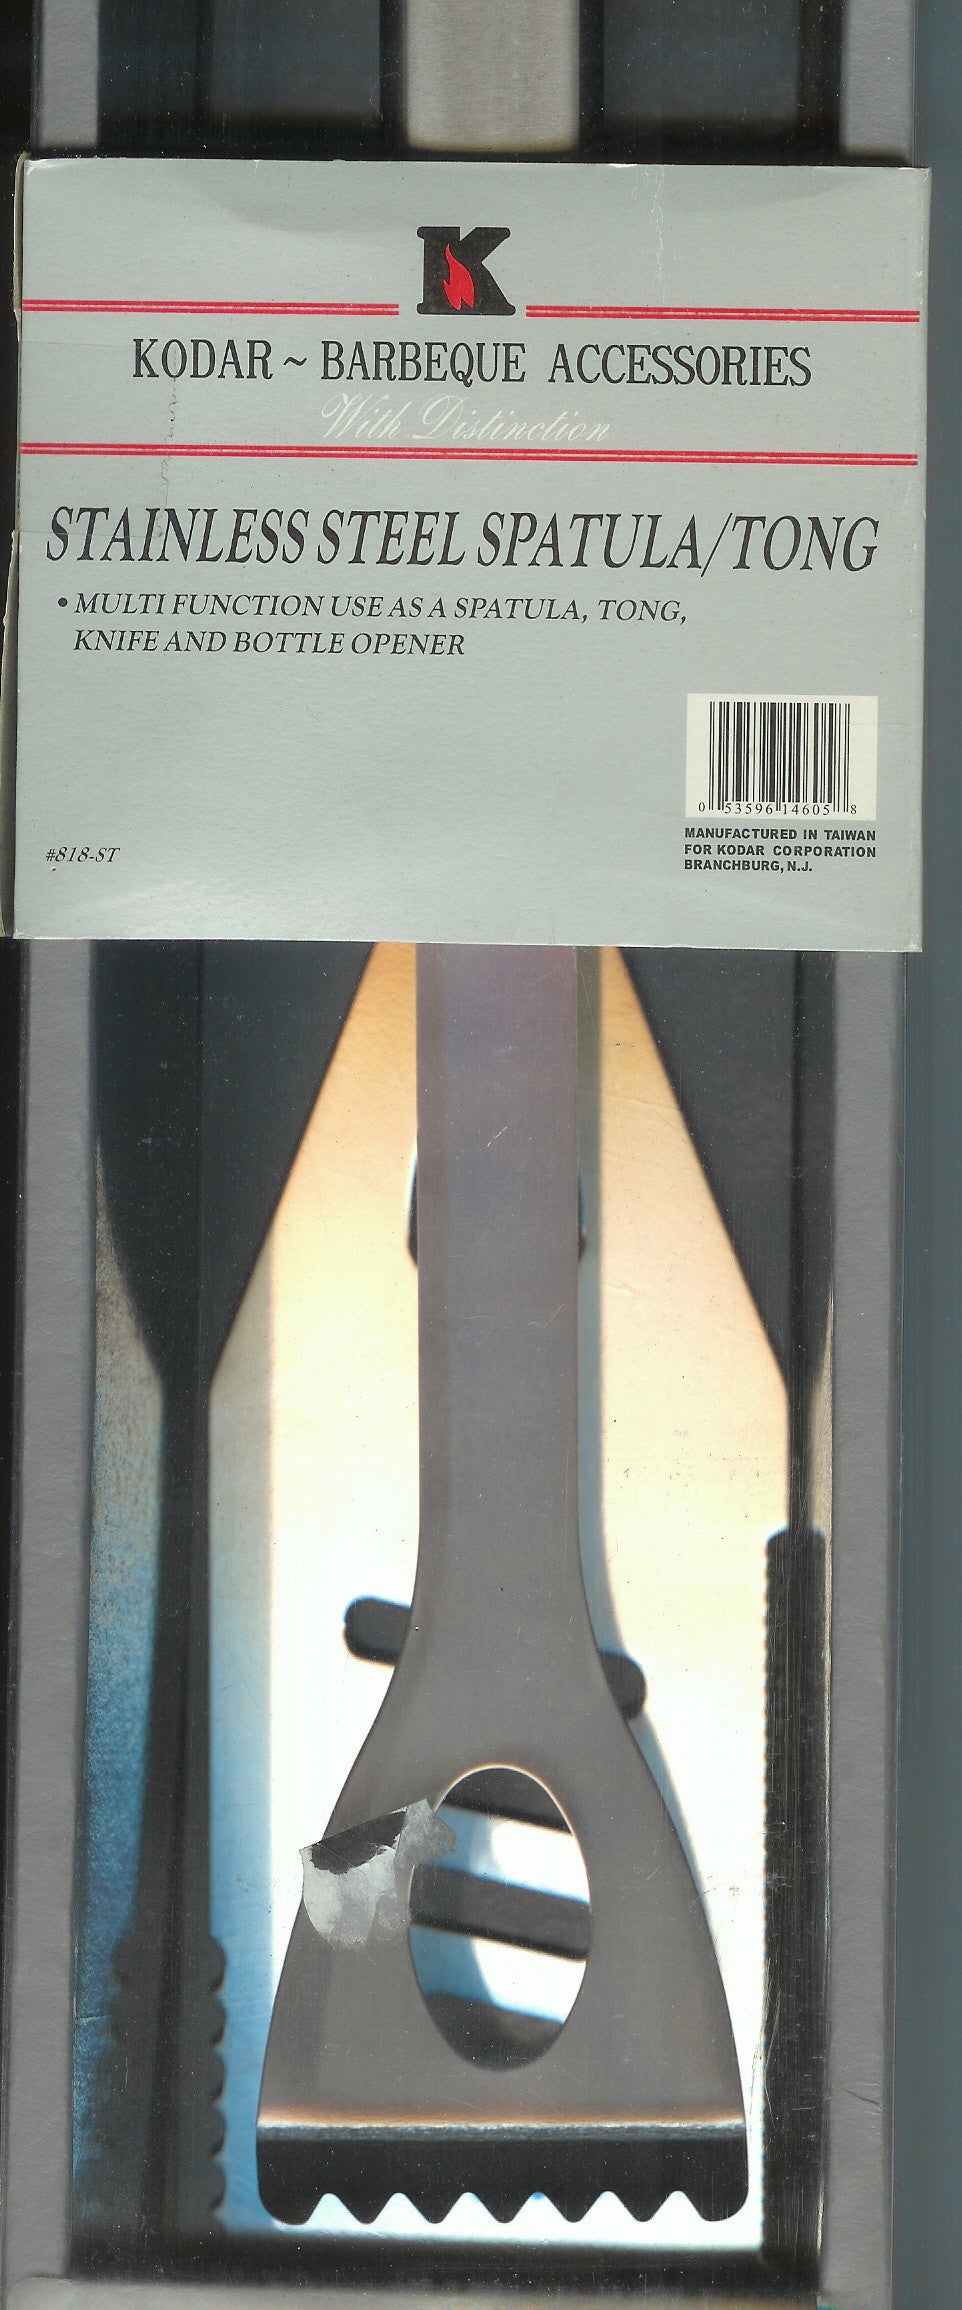 BBQ STAINLESS STEEL SPATULA / TONG